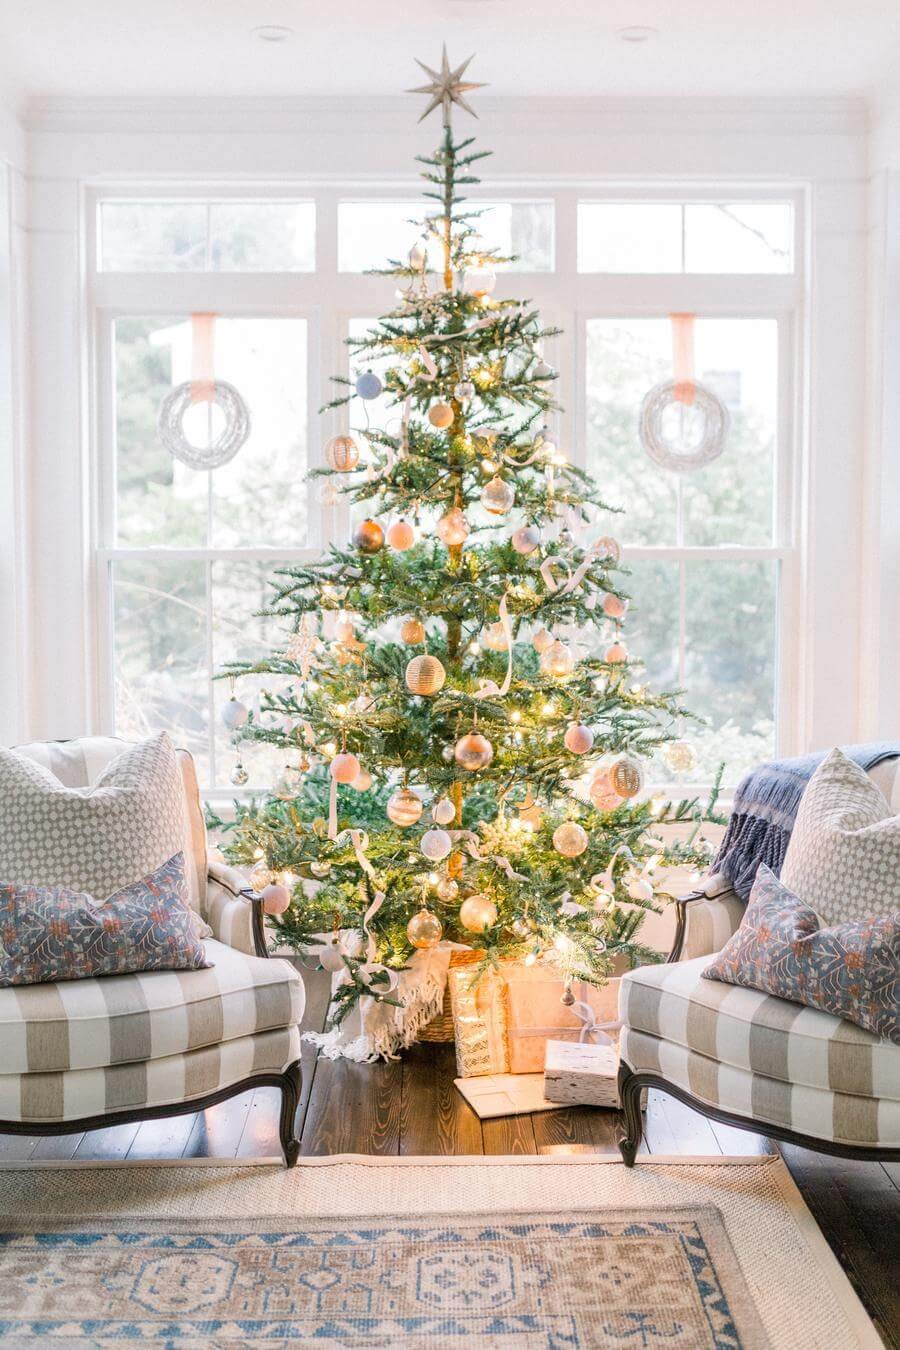 The Best Places to Buy Romantic Christmas Trees